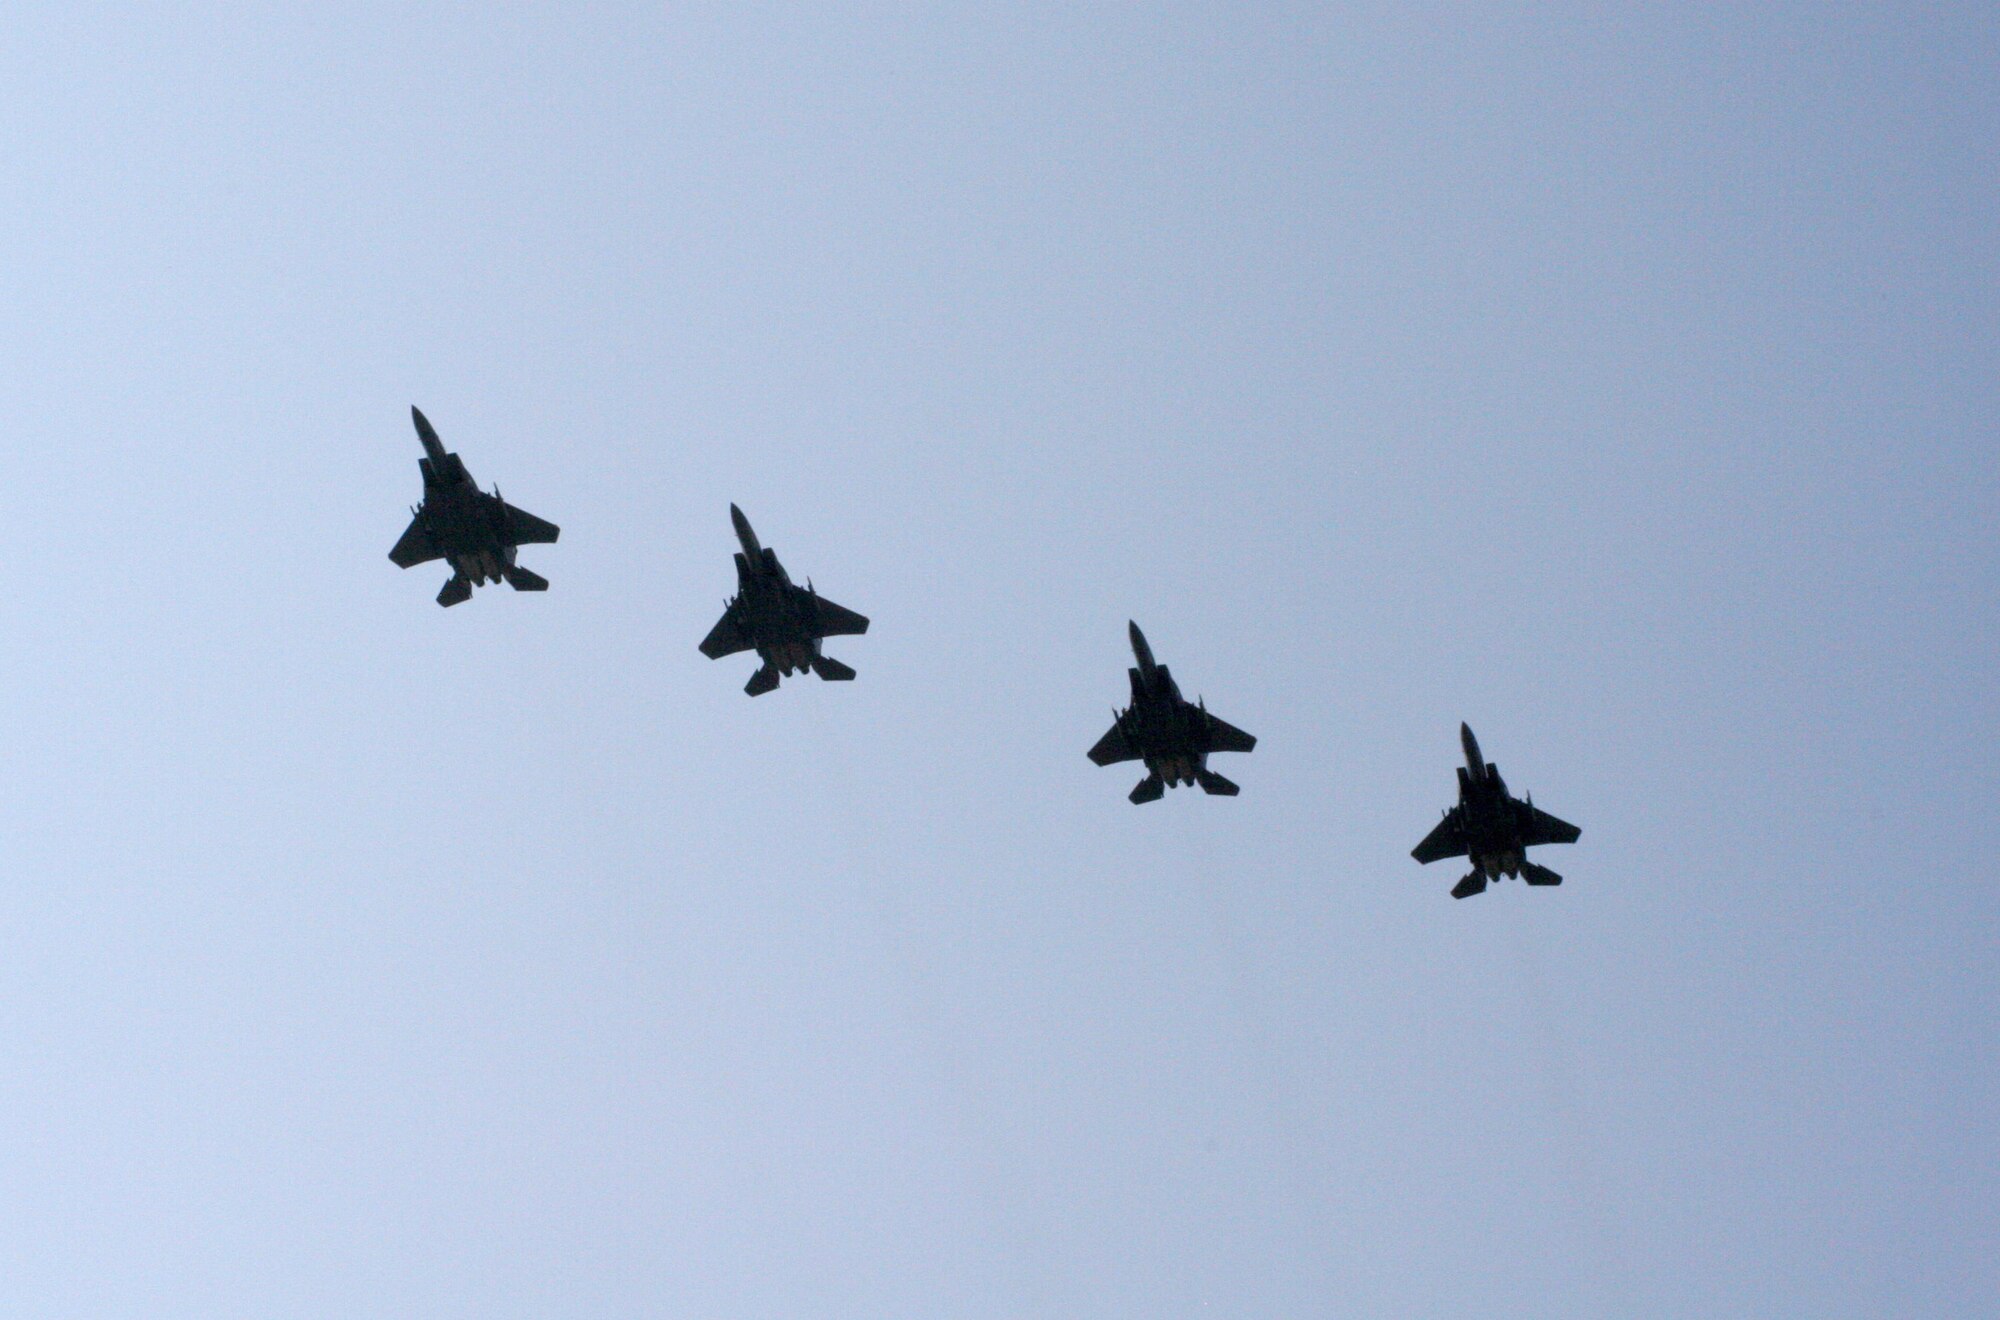 A four ship of F-15E Strike Eagles from Seymour Johnson Air Force Base, North Carolina perform a flyover for the Salute the Troops parade in downtown Raleigh, North Carolina, April 26. The intent of the event was to gather the people of North Carolina together to show appreciation to all of the United States Military personnel. The parade featured every branch of the active-duty military, the National Guard, Air Guard and Coast Guard, from every installation in the state and more than 50,000 spectators attended. The flyover represents the men and women of the 4th Fighter wing who put airpower, on target, on time. (U.S. Air Force photo by Capt. Tana R.H. Stevenson)